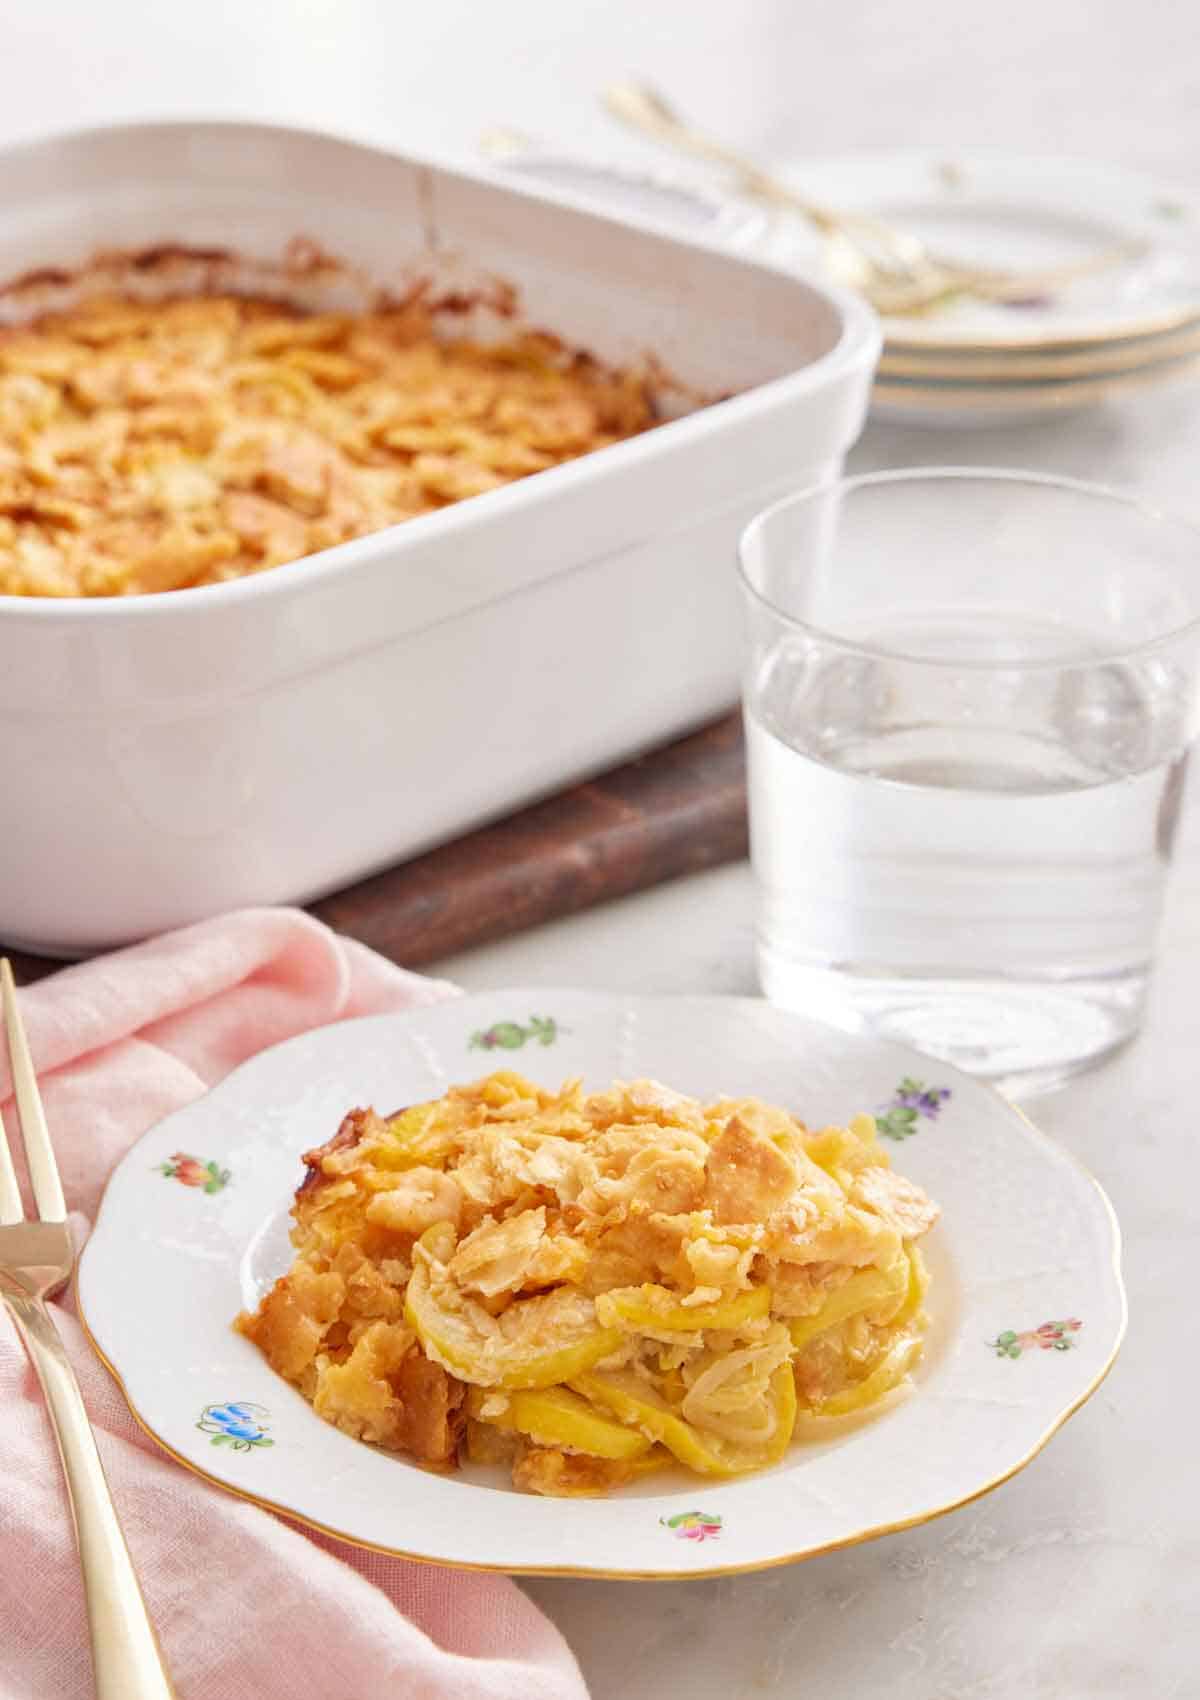 A plate with a serving of squash casserole with a glass of water and baking dish in the background.